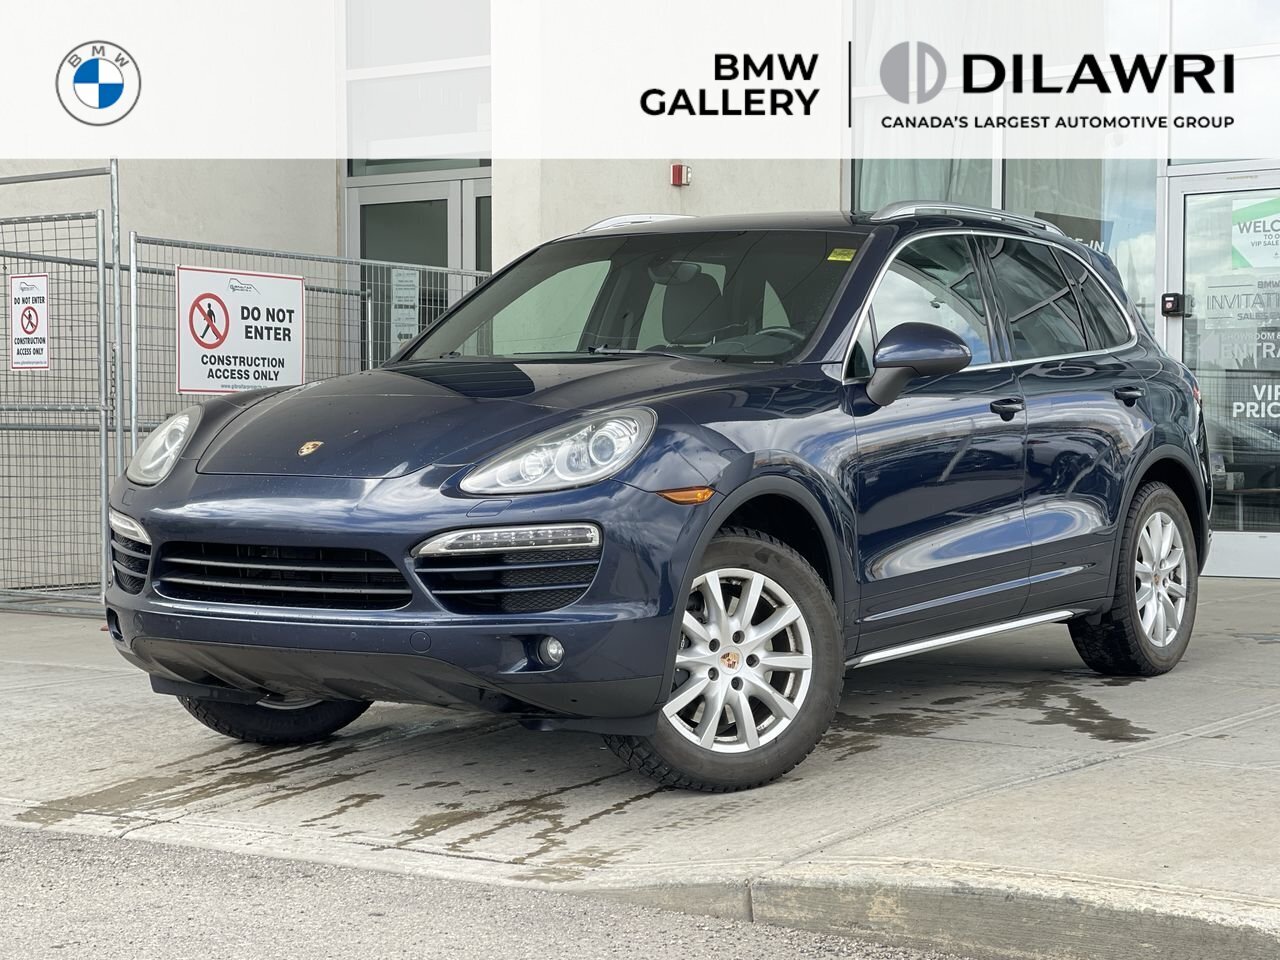 2013 Porsche Cayenne No accidents, two sets of tires, navigation, heate